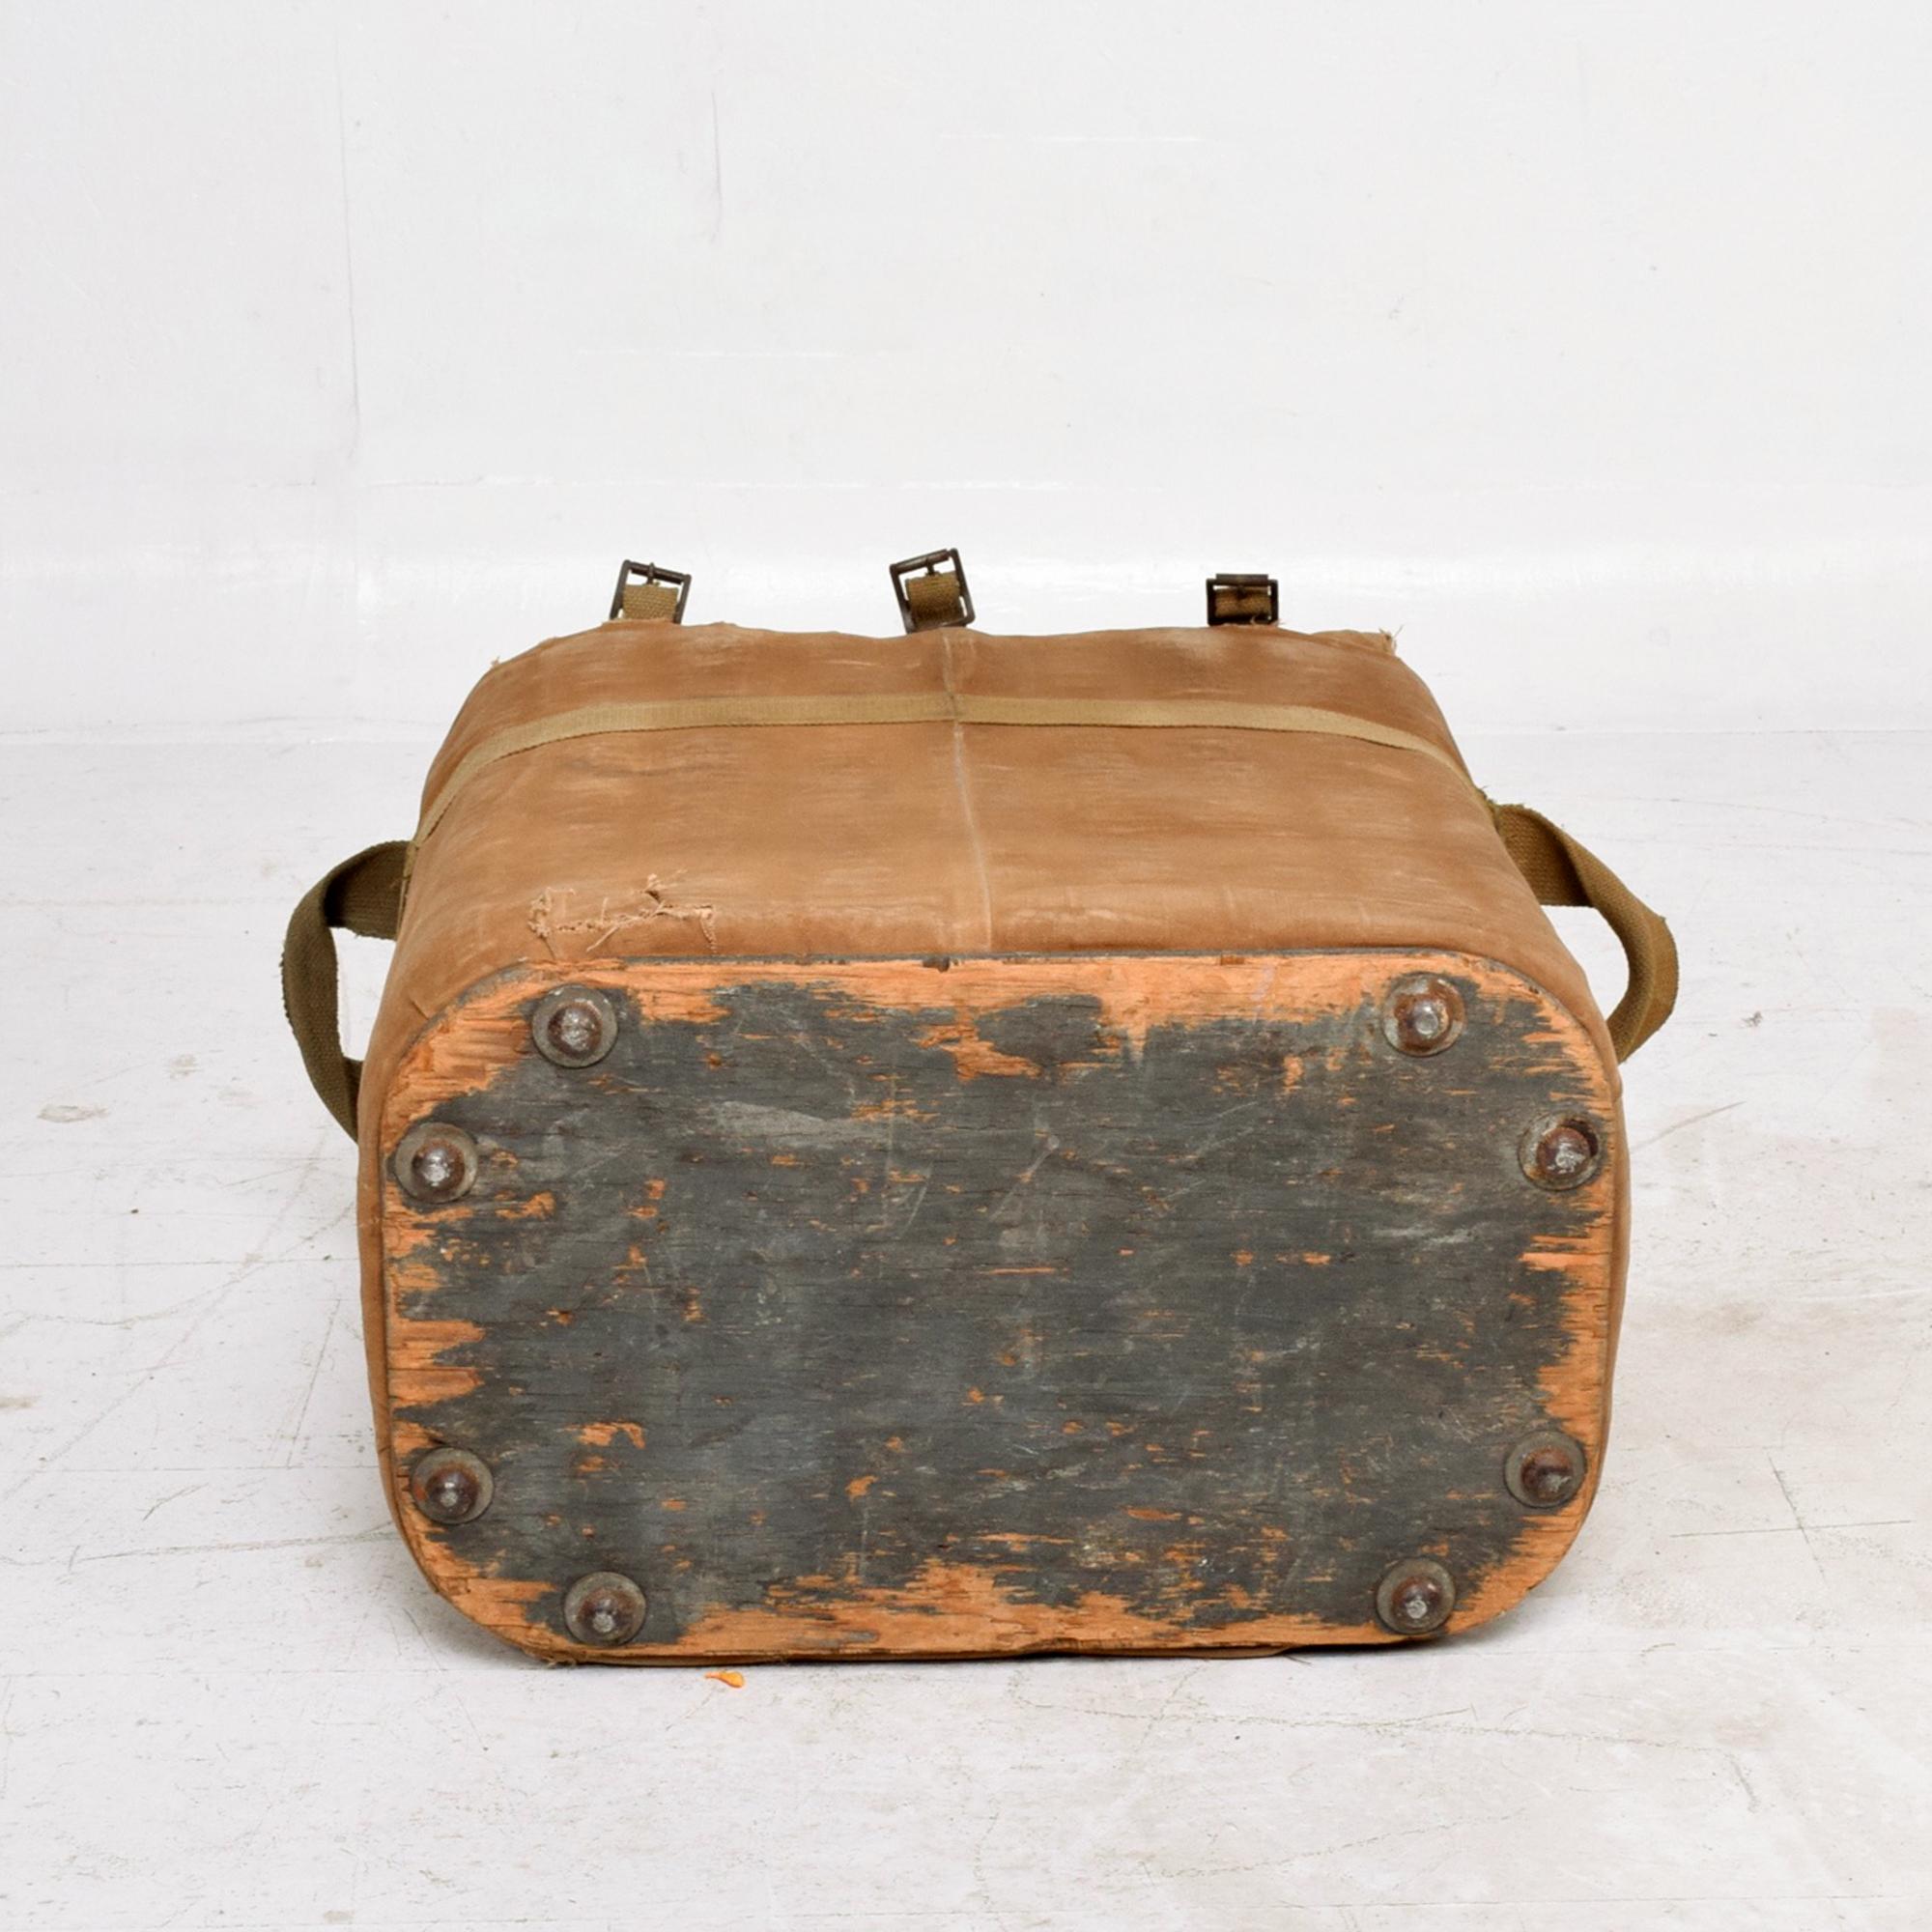 Metal Distressed Military Surplus Industrial ICE COOLER Tote Chest 1940s US Army